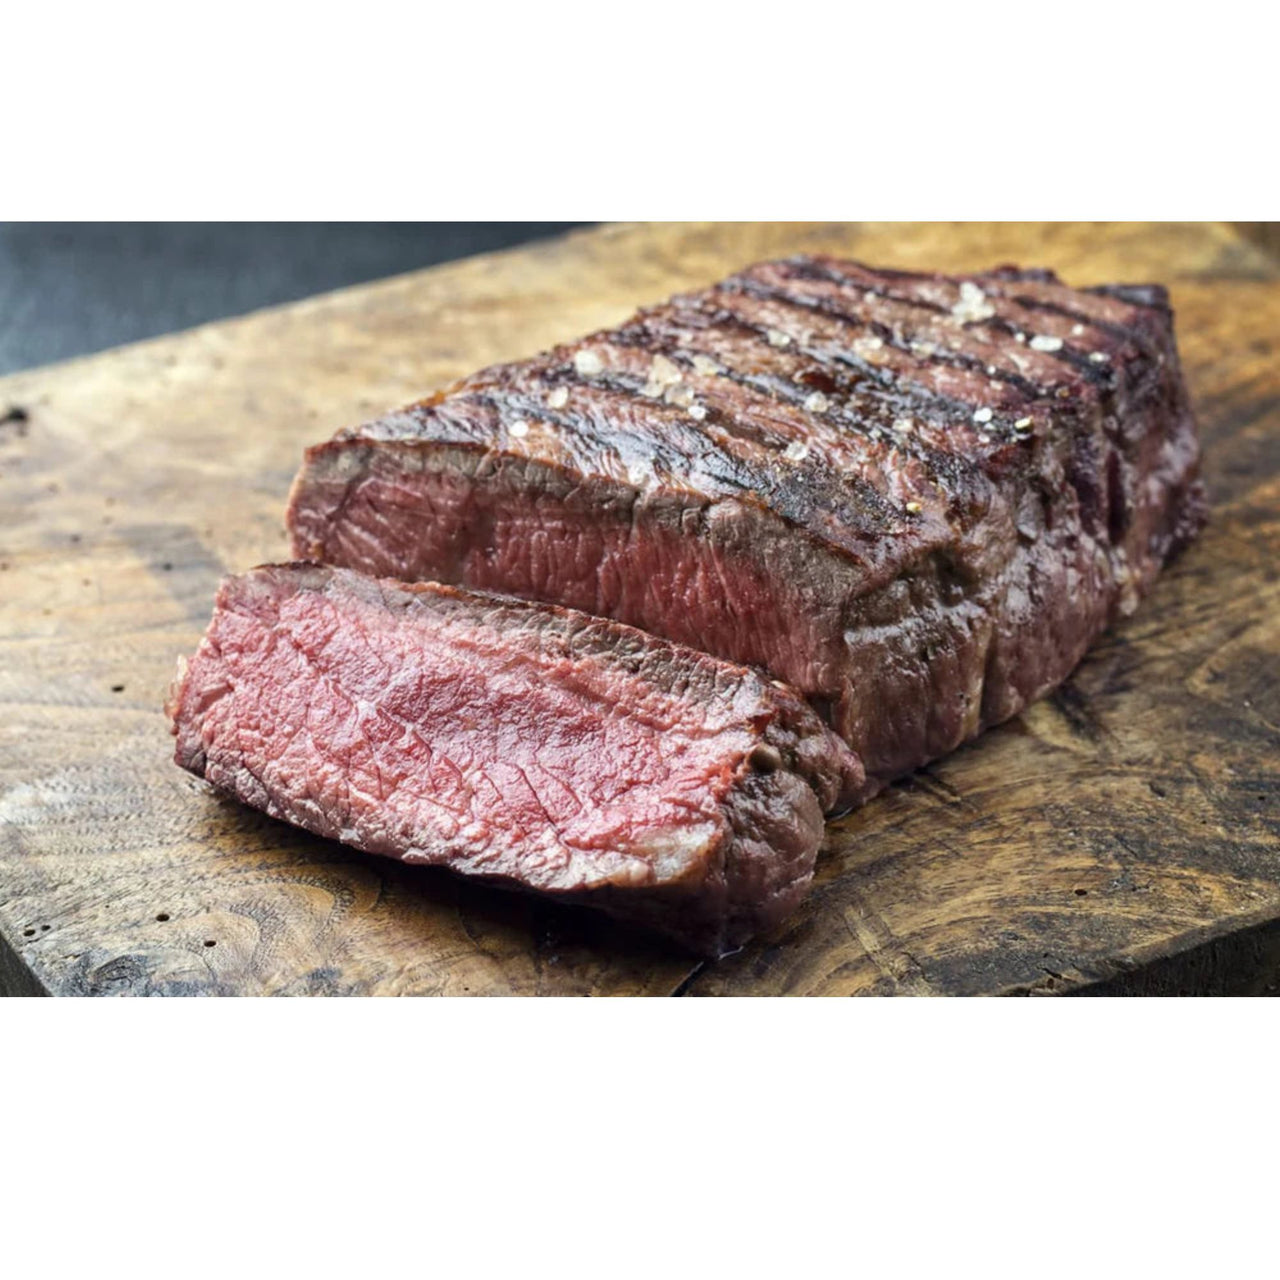 Image of F2F Top Sirloin Roast - (Coulotte)- AAA Aged 28 Days Beef Top Beef Butt Cover Roasts 3.4avg